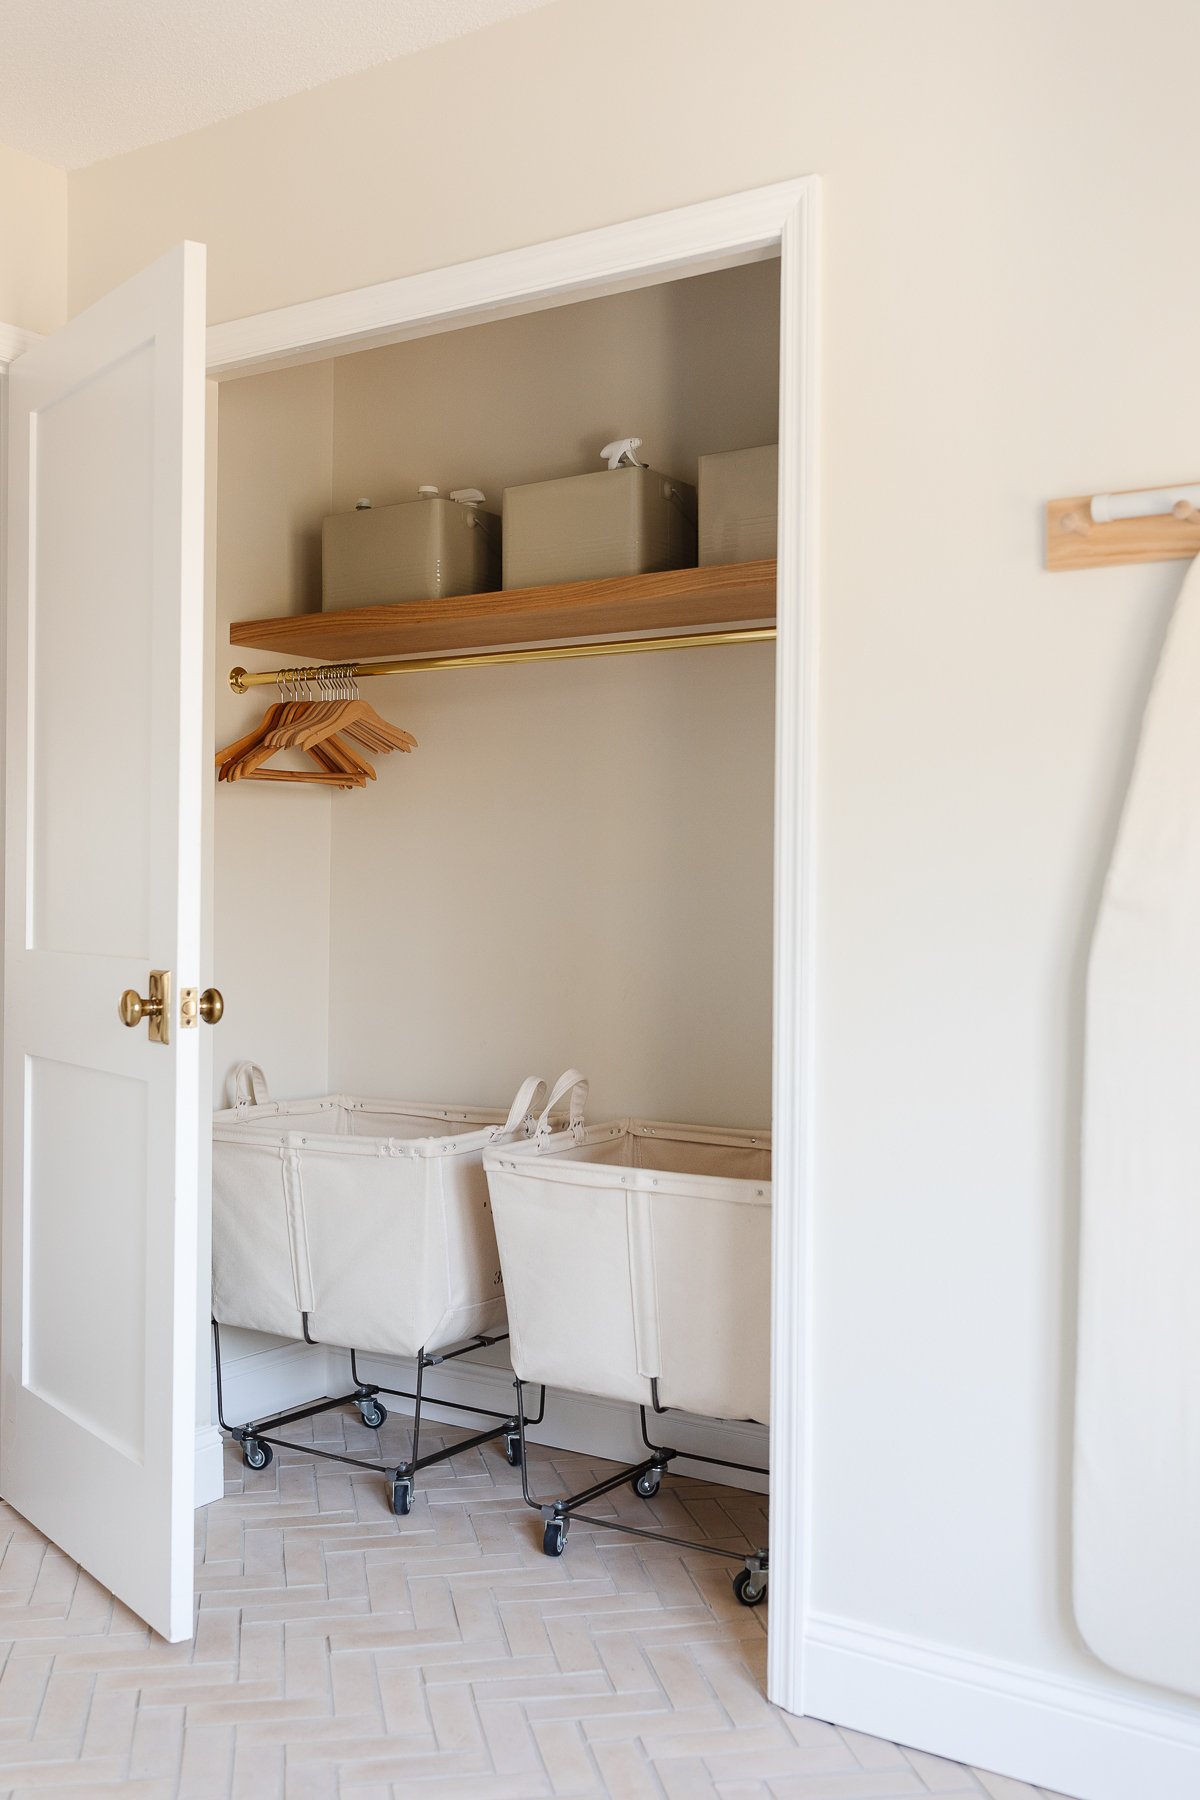 A white laundry room with shaker style doors on the washer and dryer.